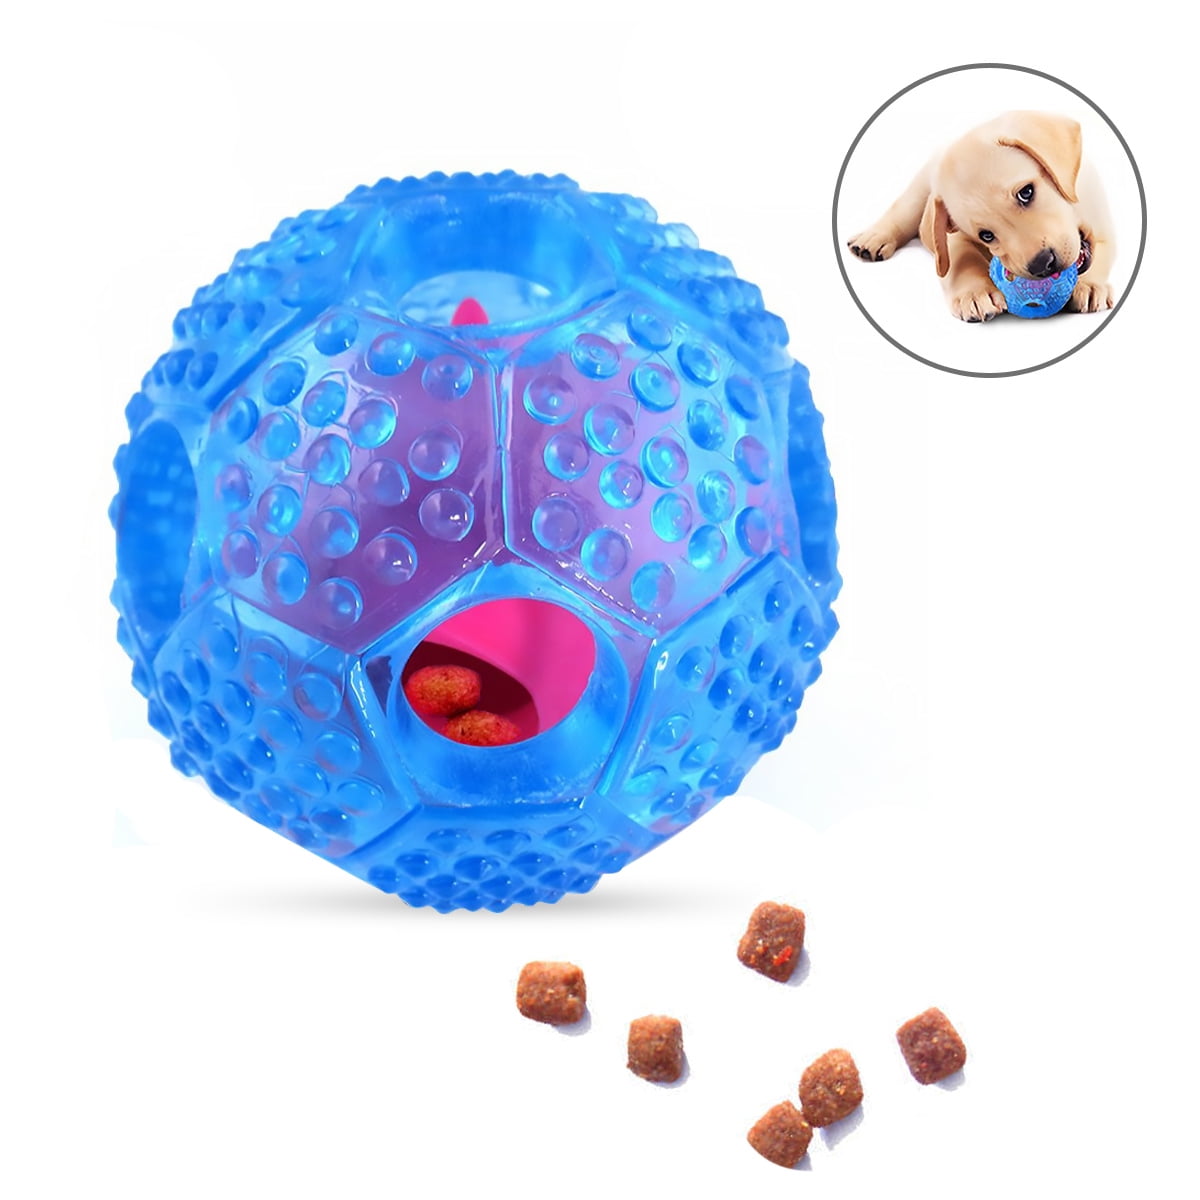 Nerf Dog Puzzle Treat Ball 3.5” Slow Feeder Dog Toy for Small